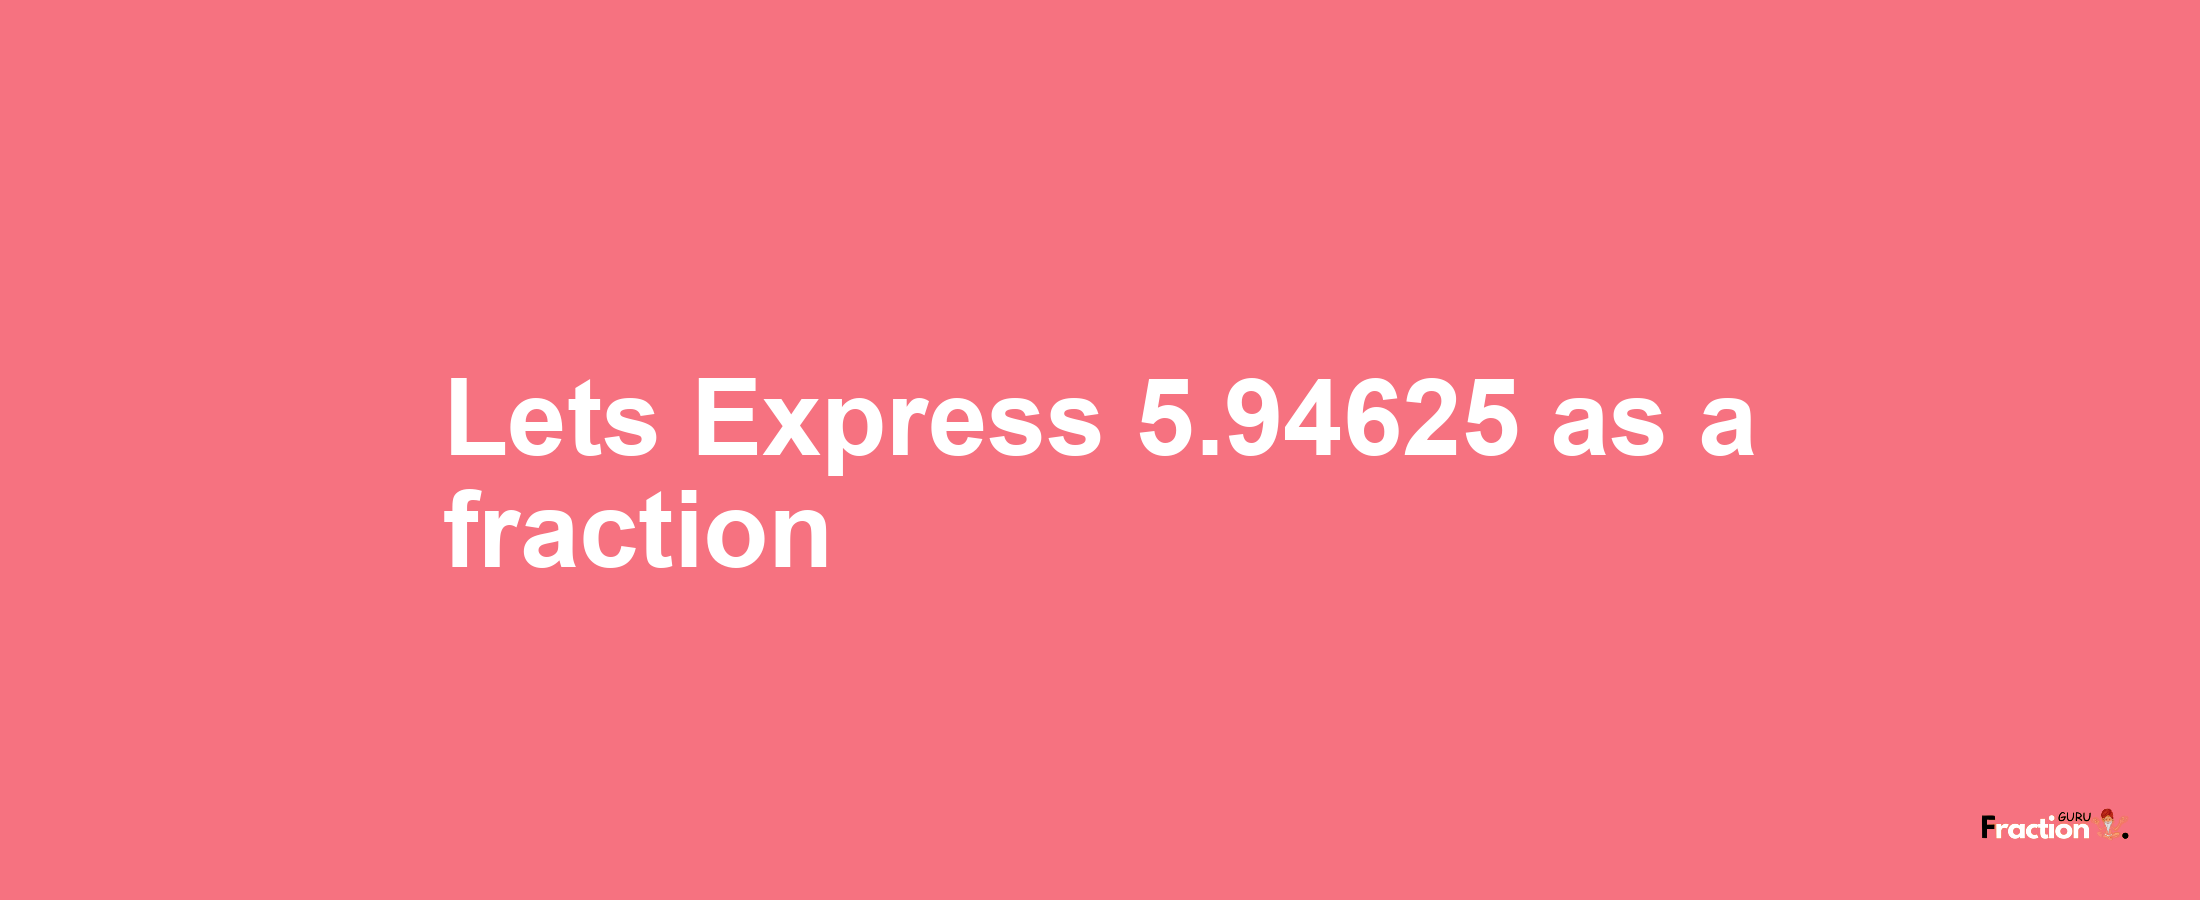 Lets Express 5.94625 as afraction